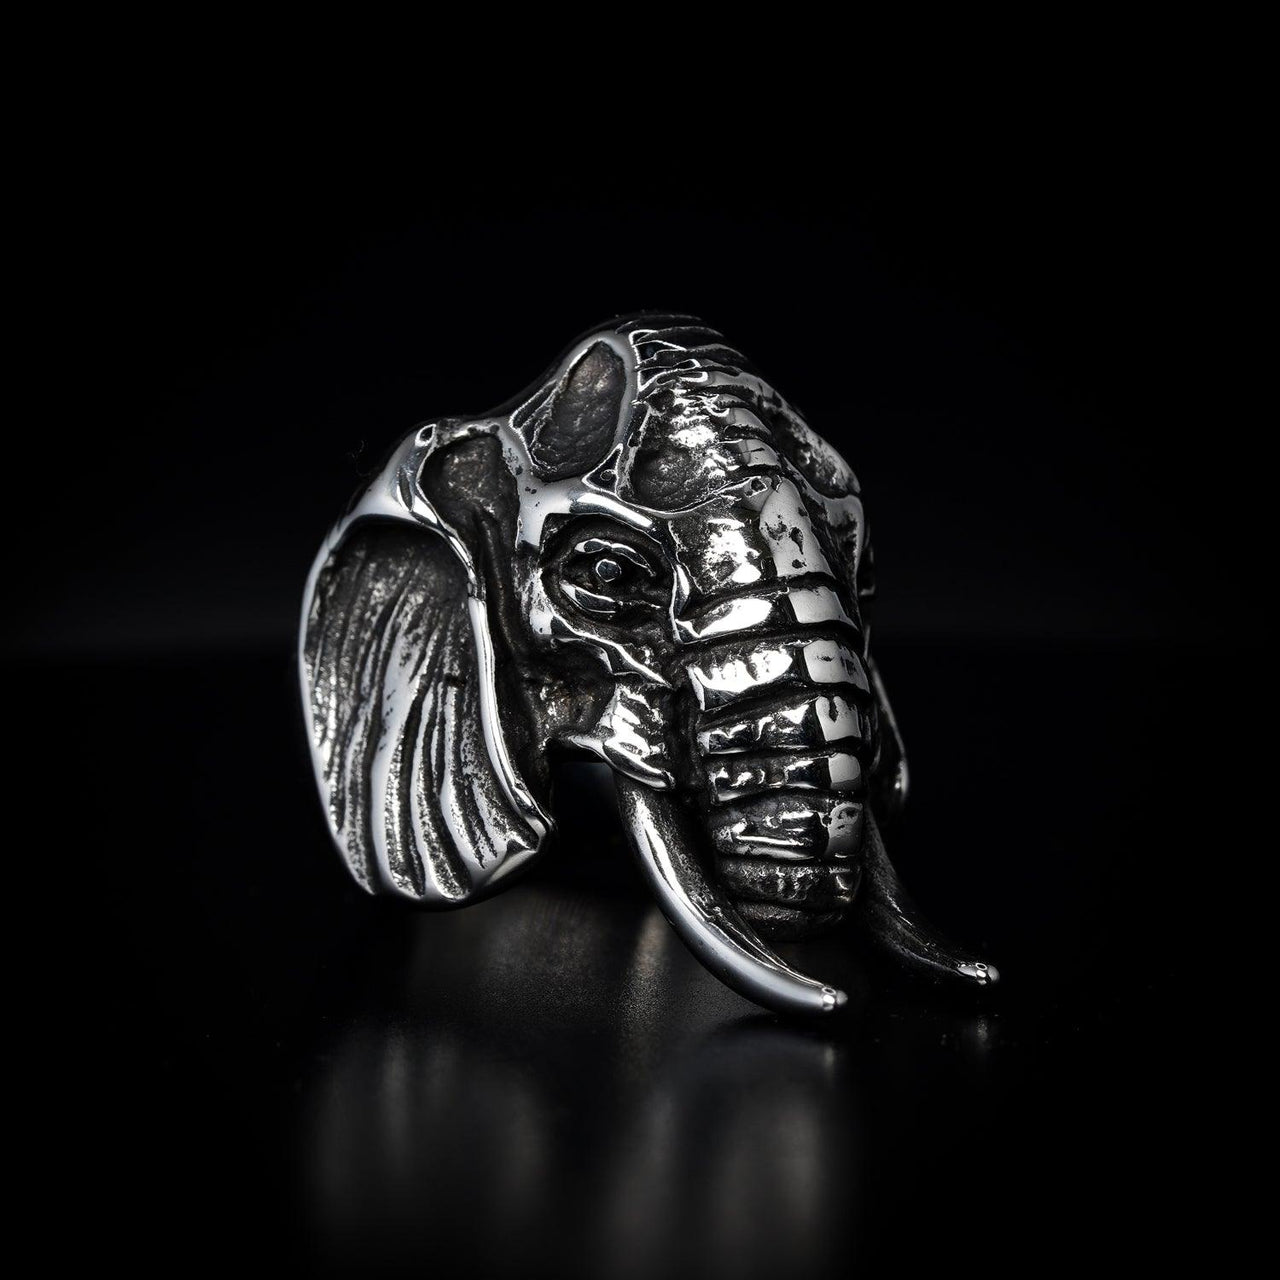 Elephant King - Stainless Steel - Black Feather Design